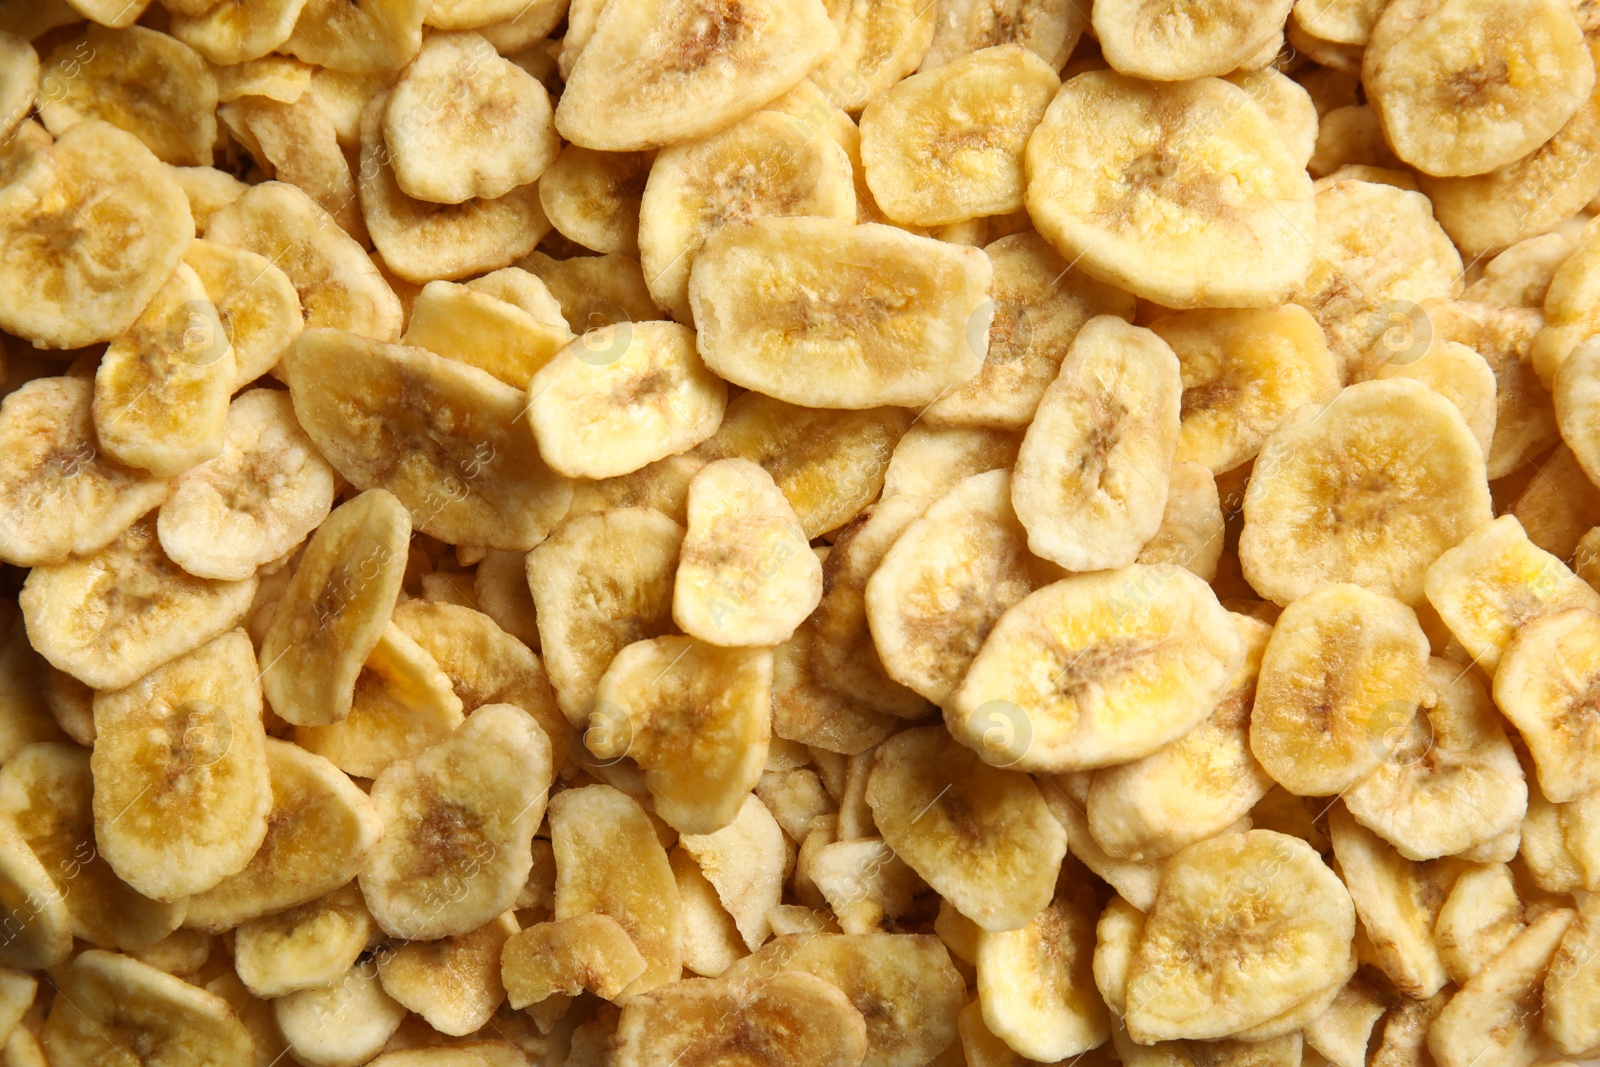 Photo of Sweet banana slices as background, top view. Dried fruit as healthy snack